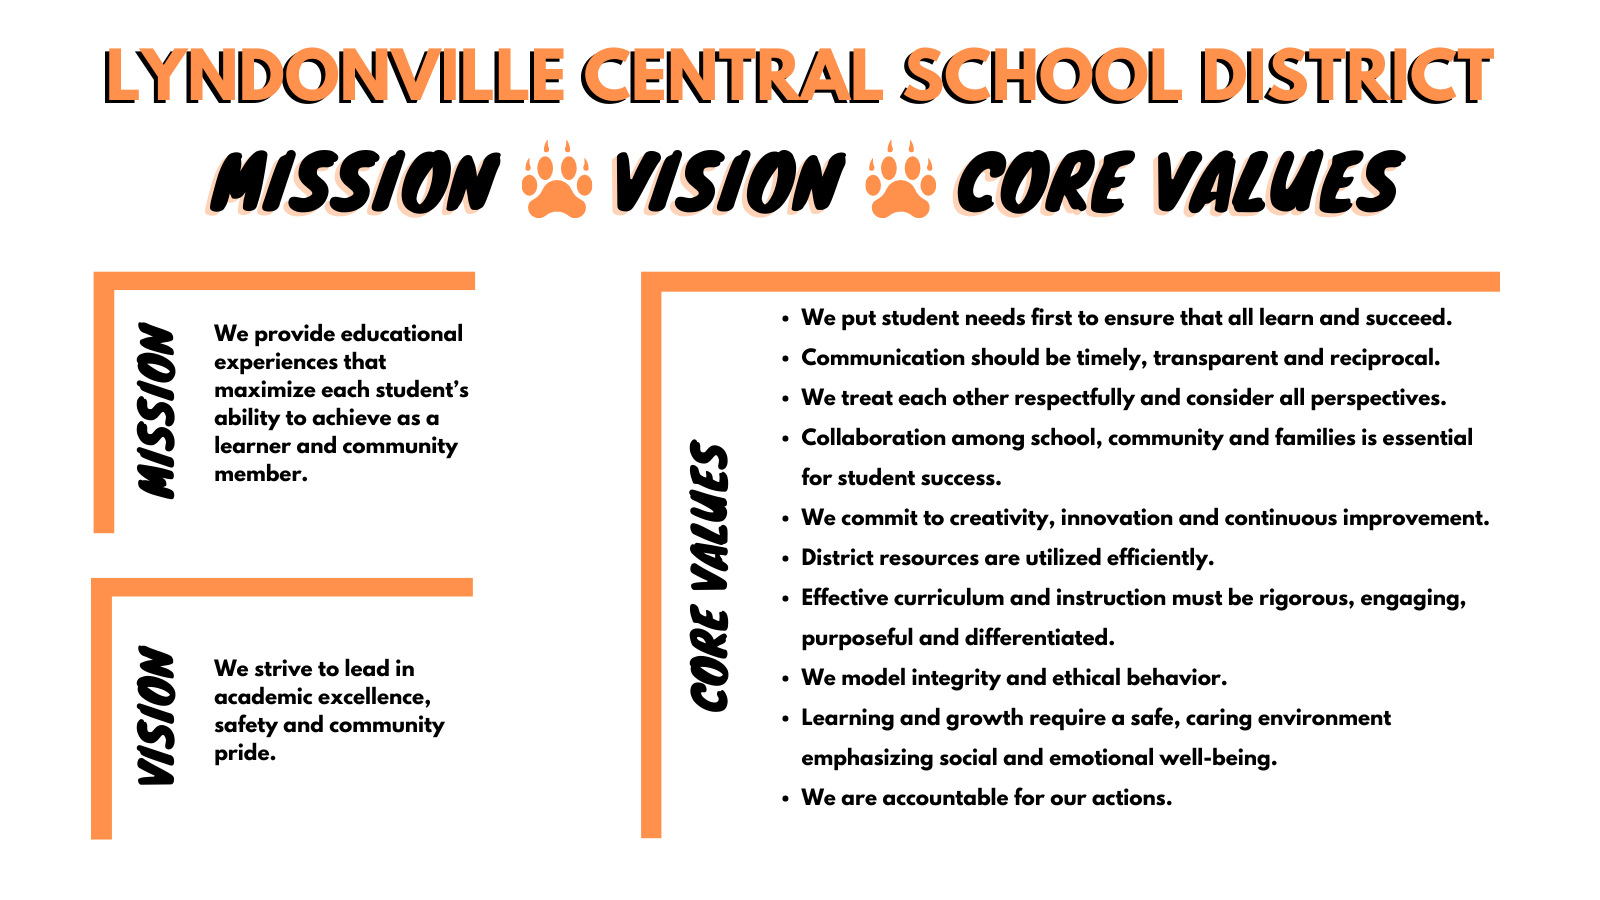 mission: We provide educational experiences that maximize each student’s ability to achieve as a learner and community member.. vision: We strive to lead in academic excellence, safety and community pride. core values: We put student needs first to ensure that all learn and succeed; Communication should be timely, transparent and reciprocal; We treat each other respectfully and consider all perspectives; Collaboration among school, community and families is essential for student success; We commit to creativity, innovation and continuous improvement; District resources are utilized efficiently; Effective curriculum and instruction must be rigorous, engaging, purposeful and differentiated; We model integrity and ethical behavior; Learning and growth require a safe, caring environment emphasizing social and emotional well-being; We are accountable for our actions.